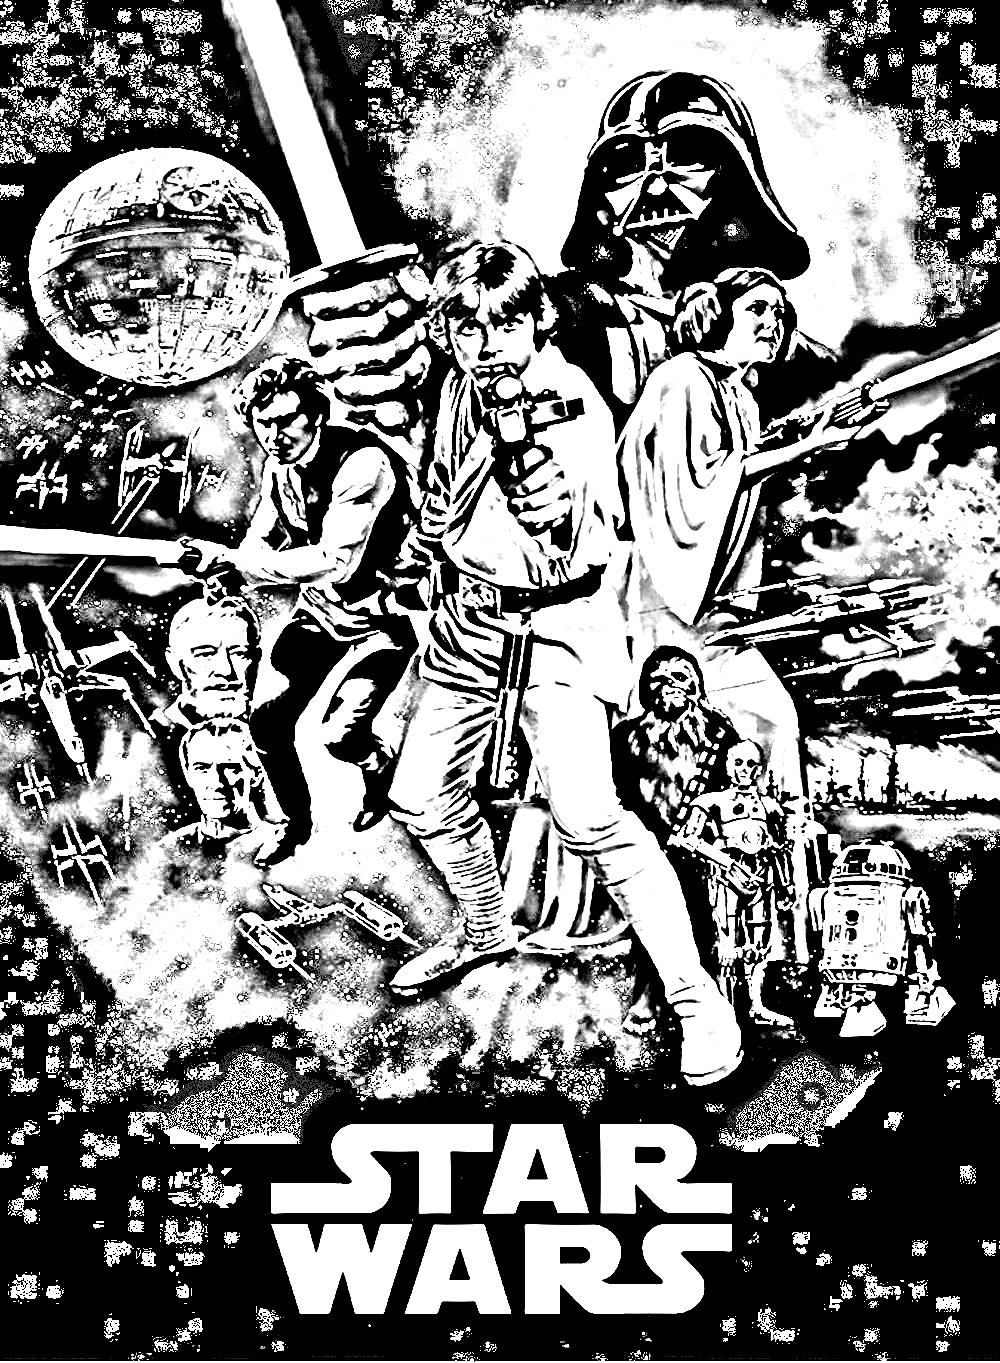 A coloring page made with the Star Wars episode IV movie poster. Star Wars: Episode IV - A New Hope (Star Wars) is a movie directed by George Lucas starring Mark Hamill, Harrison Ford. It was released in cinemas in 1977.